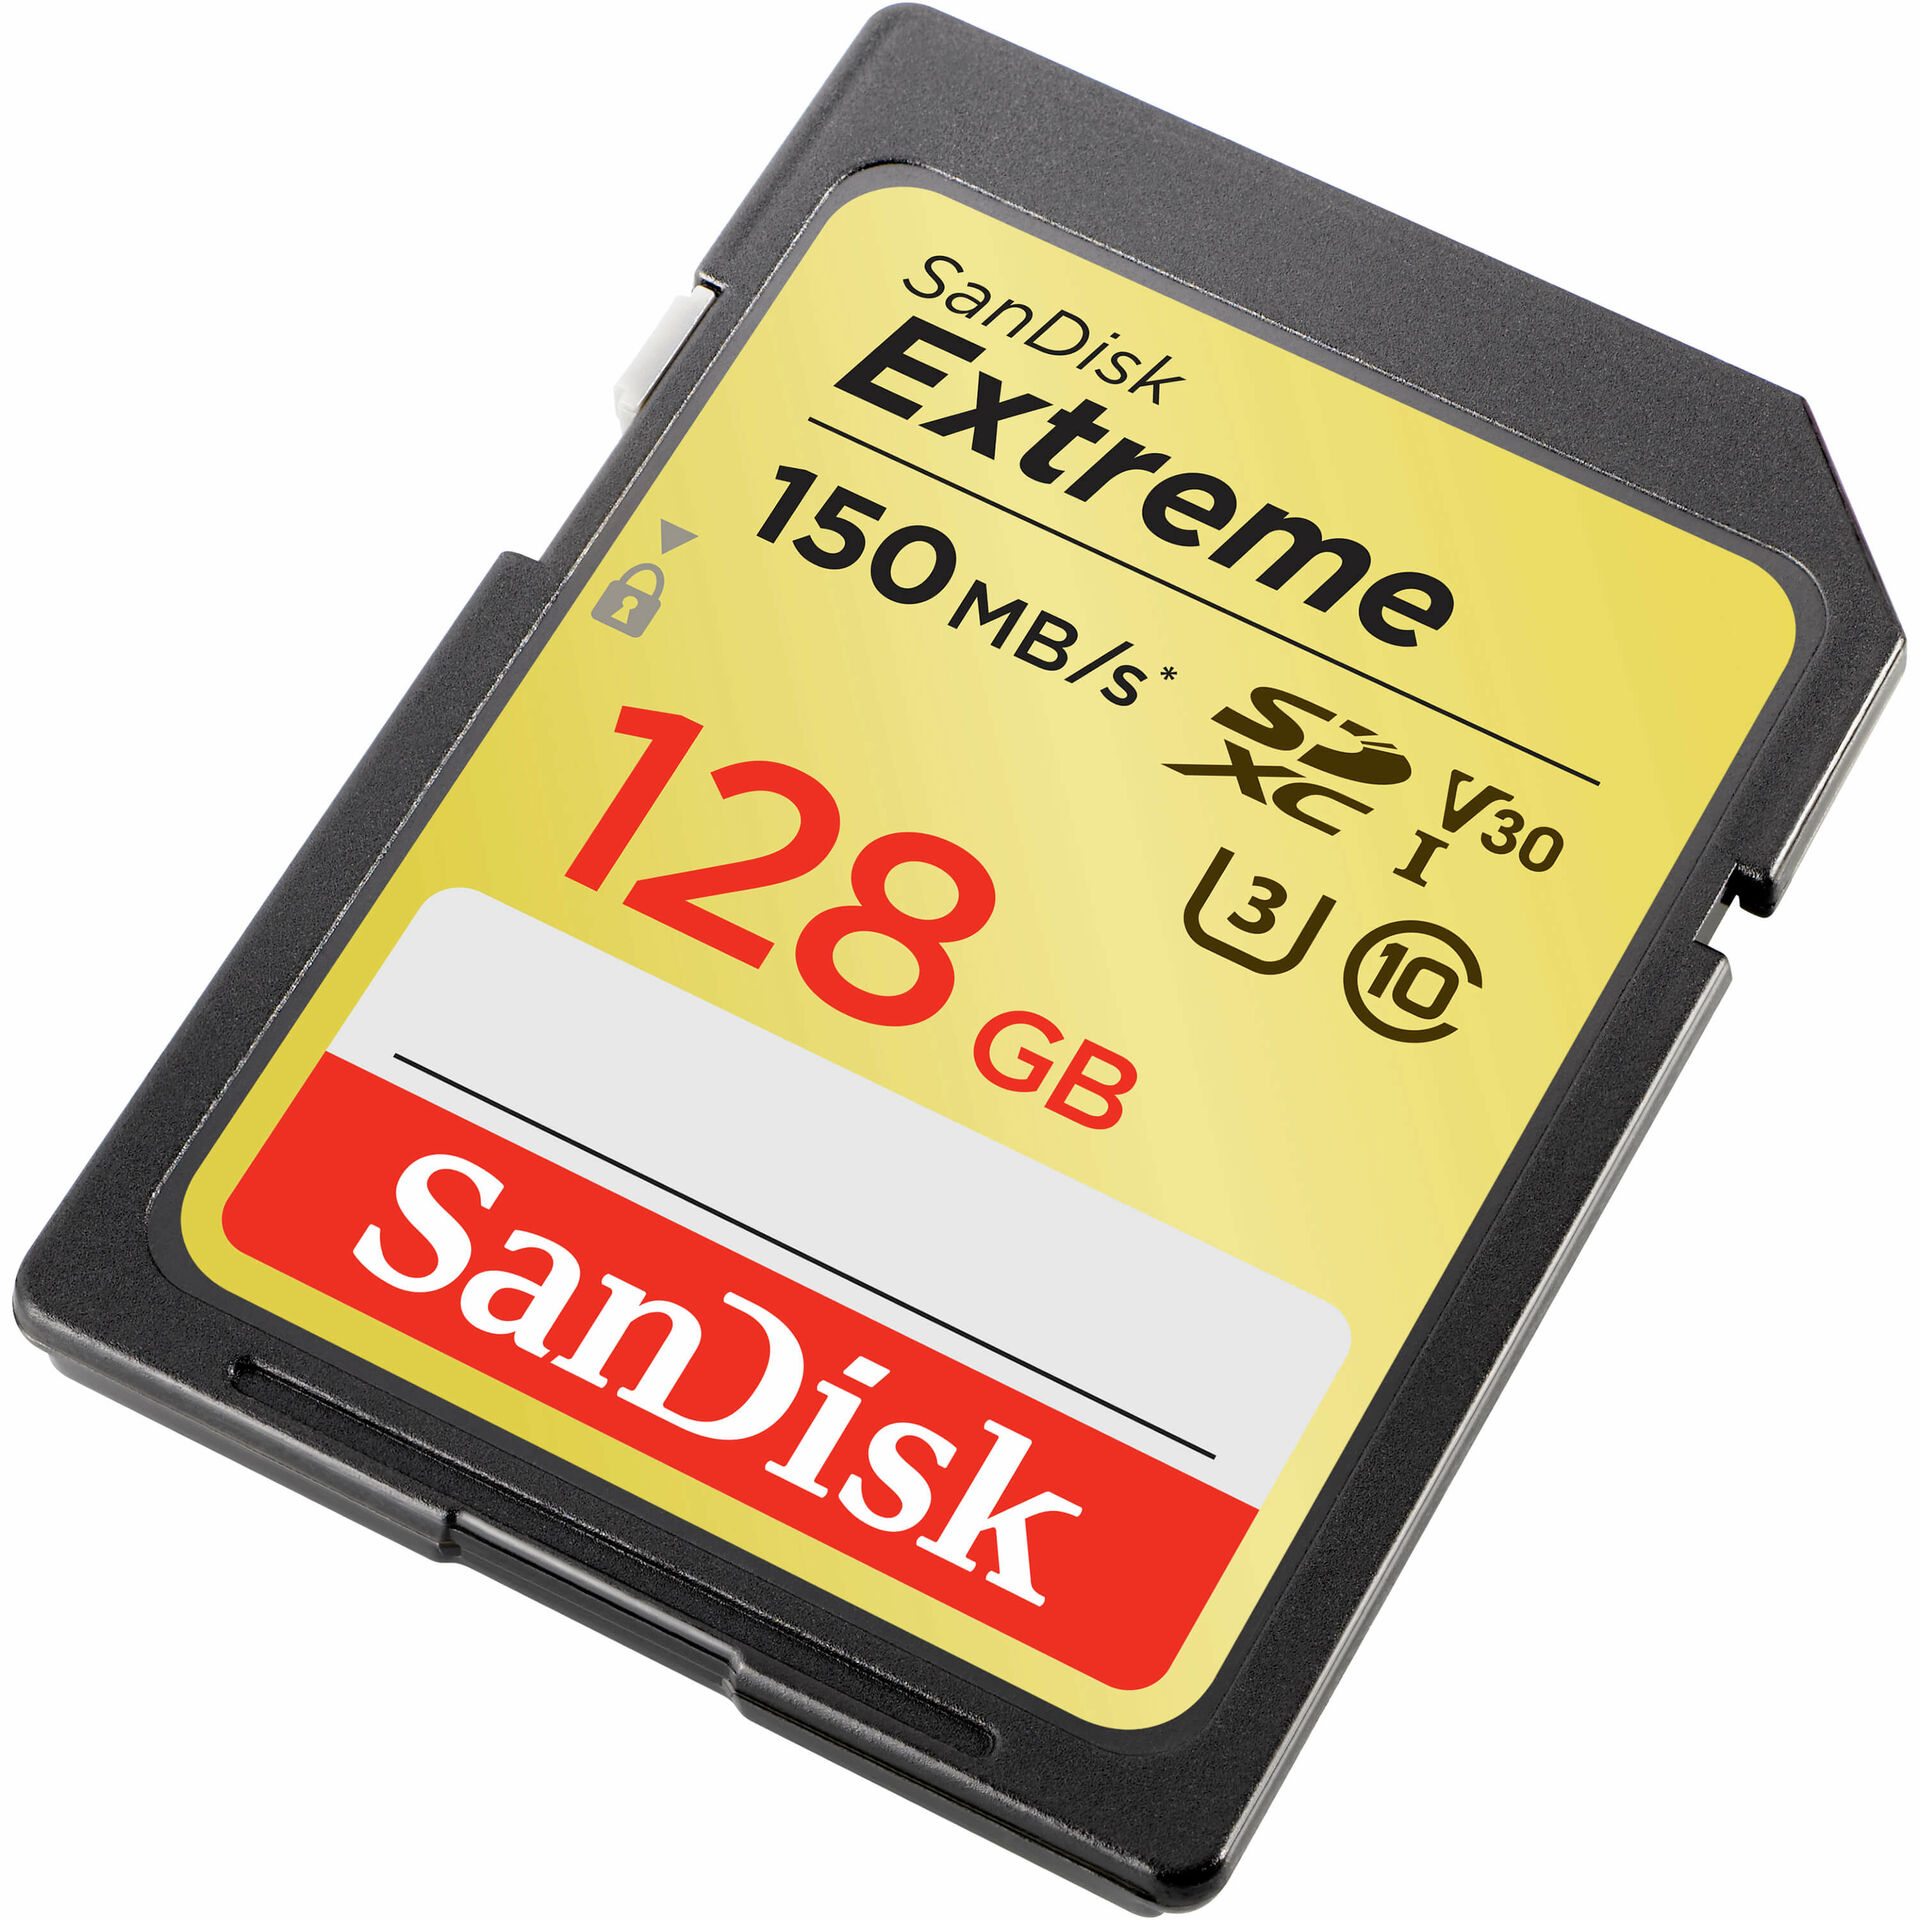 SD Card SanDisk Flash Memory 8GB 256GB Class 4/10 Speed 48MBs/80MBs/90MBs/95MBs Storage Adapter for DSLR Camera Camcorders PC Phone 64GB 128GB SanDisk Extreme 16GB 32GB 128GB